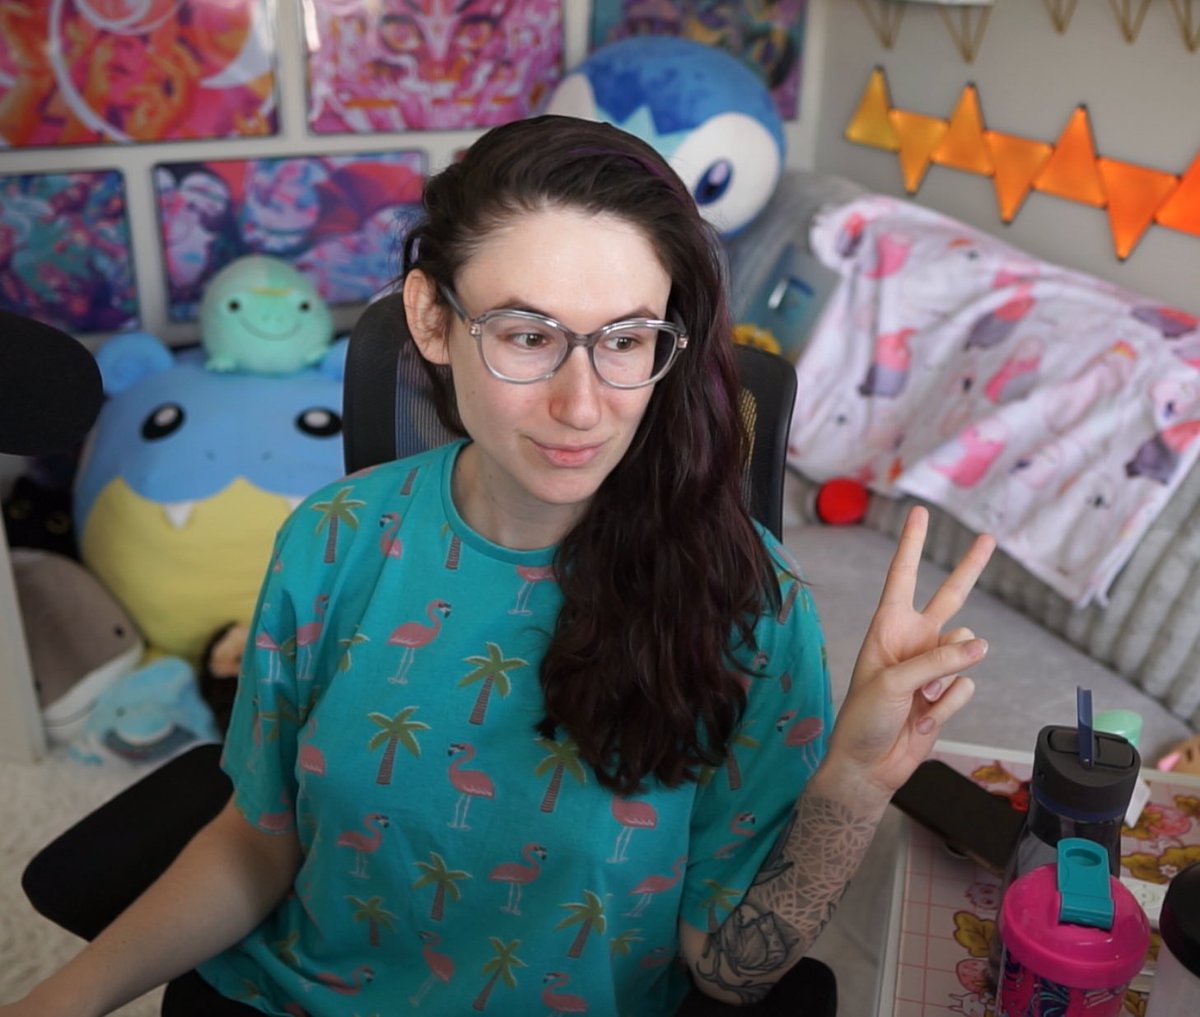 hiyooo I’m in my cute PJs, I’m comfy, and I’m BIG chillin’ come say hi :3 ✨ twitch.tv/bloody ✨